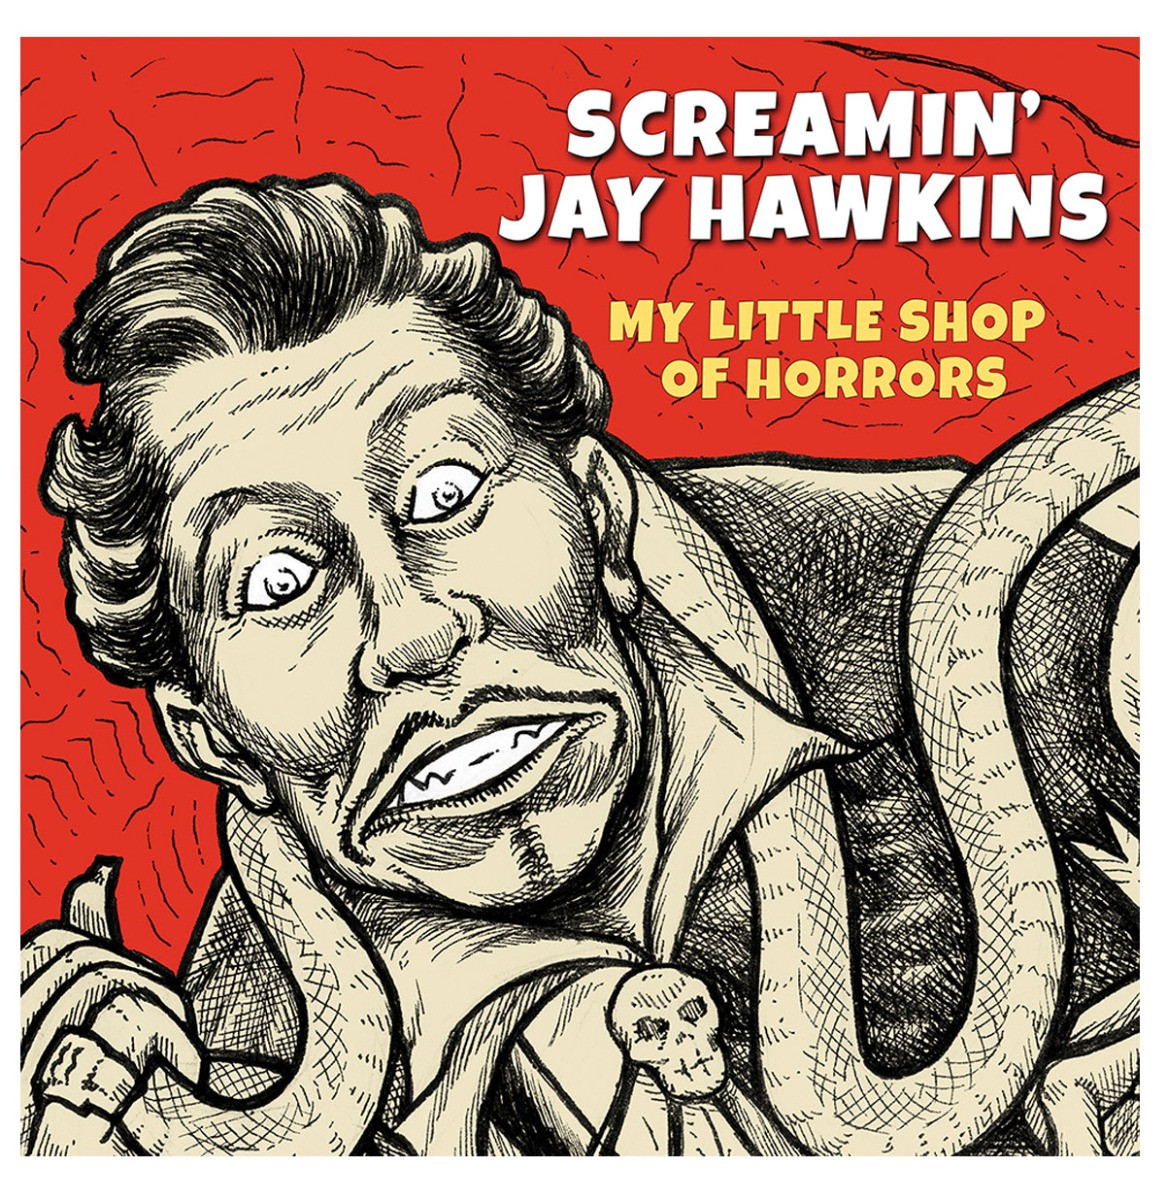 Screamin&apos; Jay Hawkins - My Little Shop Of Horrors LP (Record Store Day Black Friday)